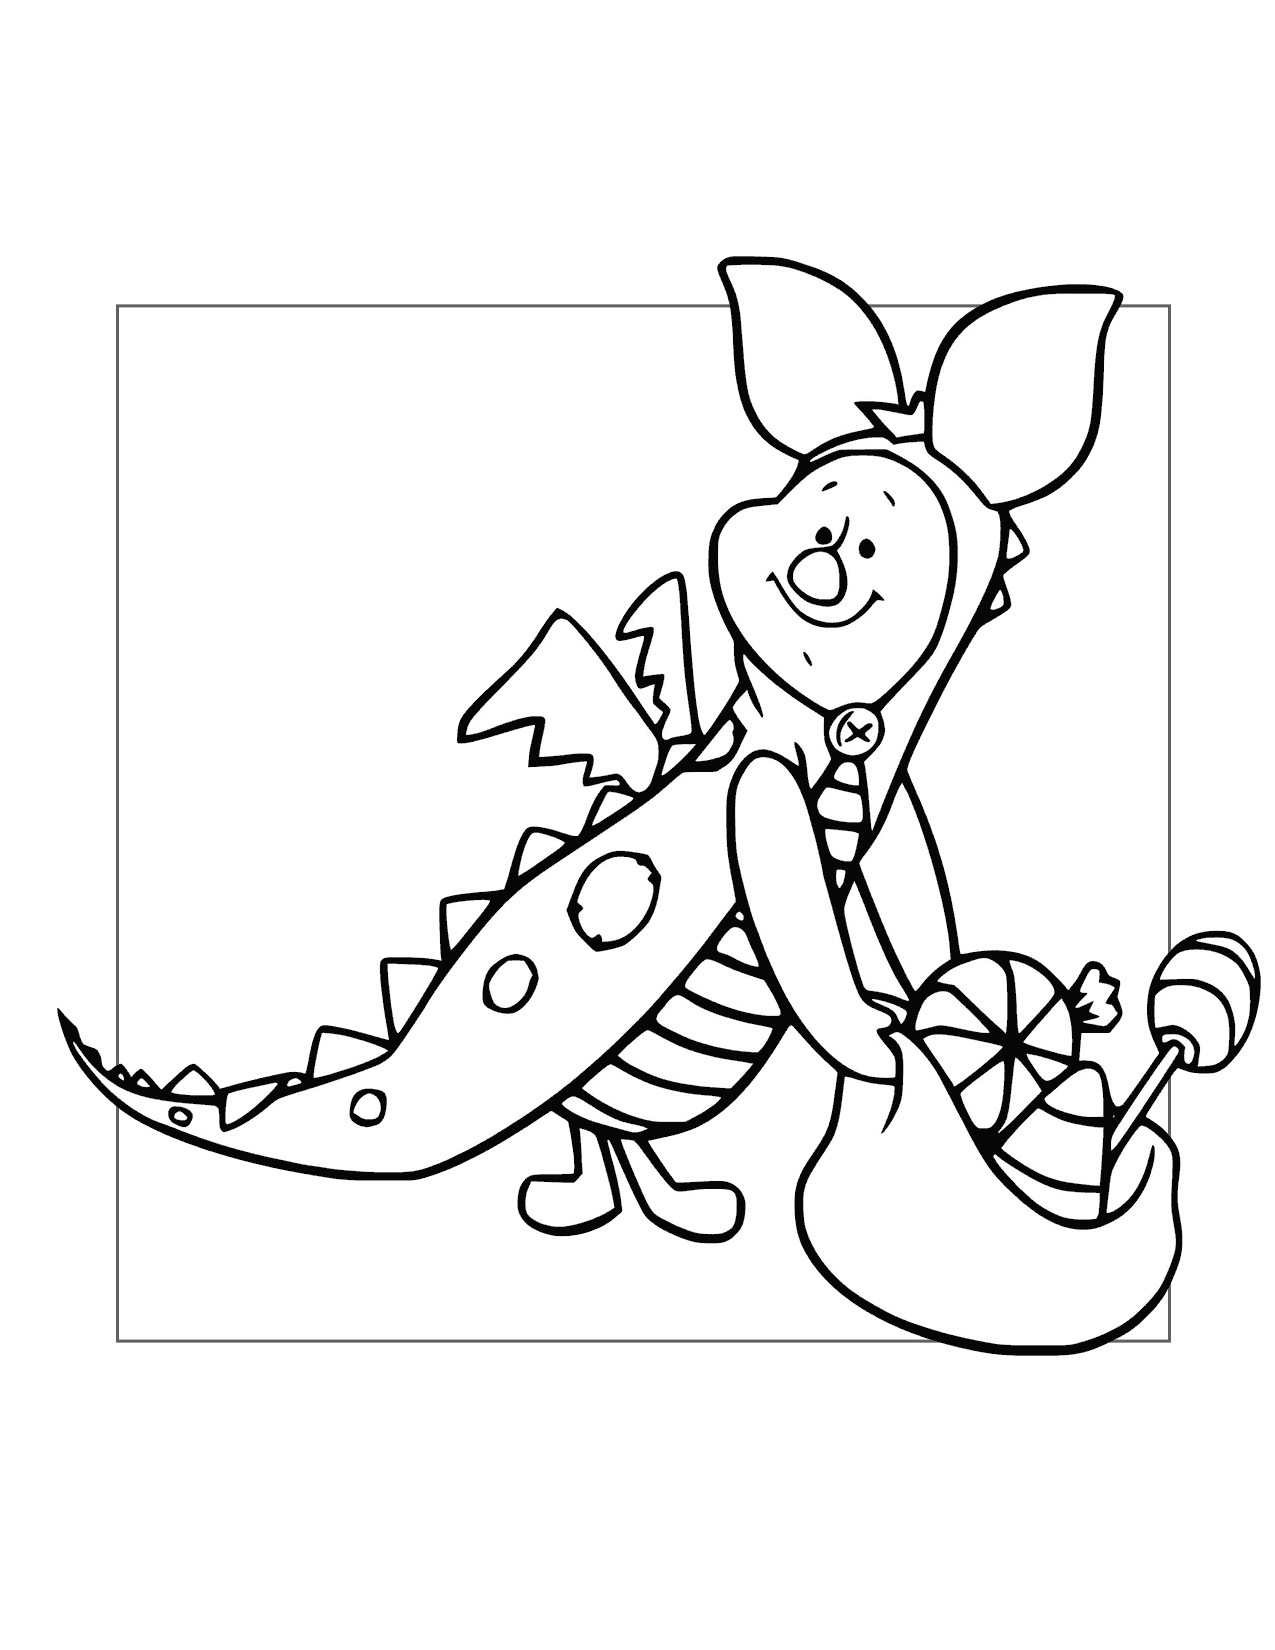 Piglets Halloween Costume Coloring Page